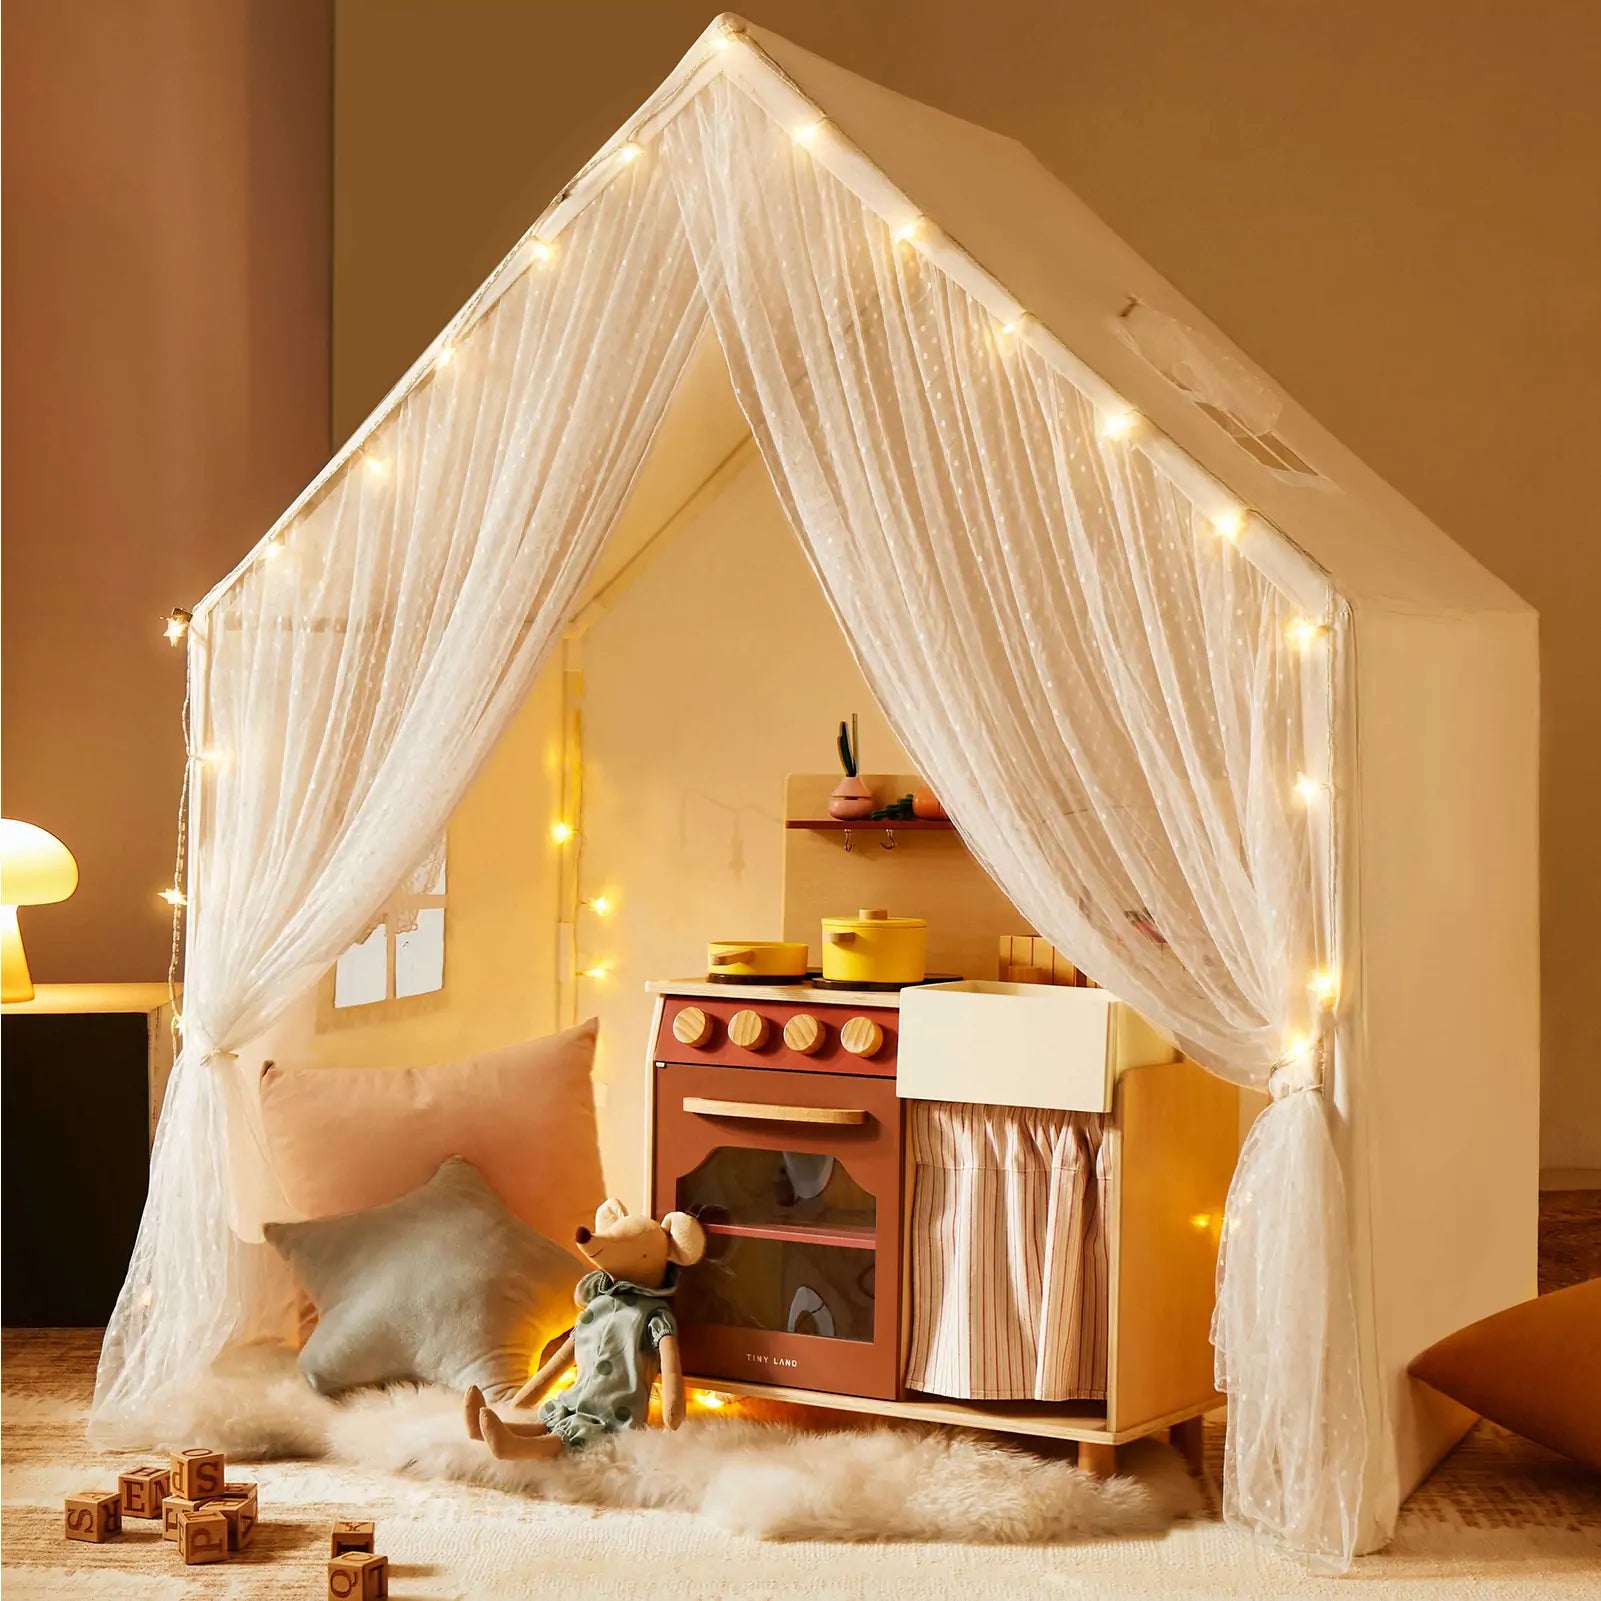 Tiny Land® Large Space Play House with Star Lights